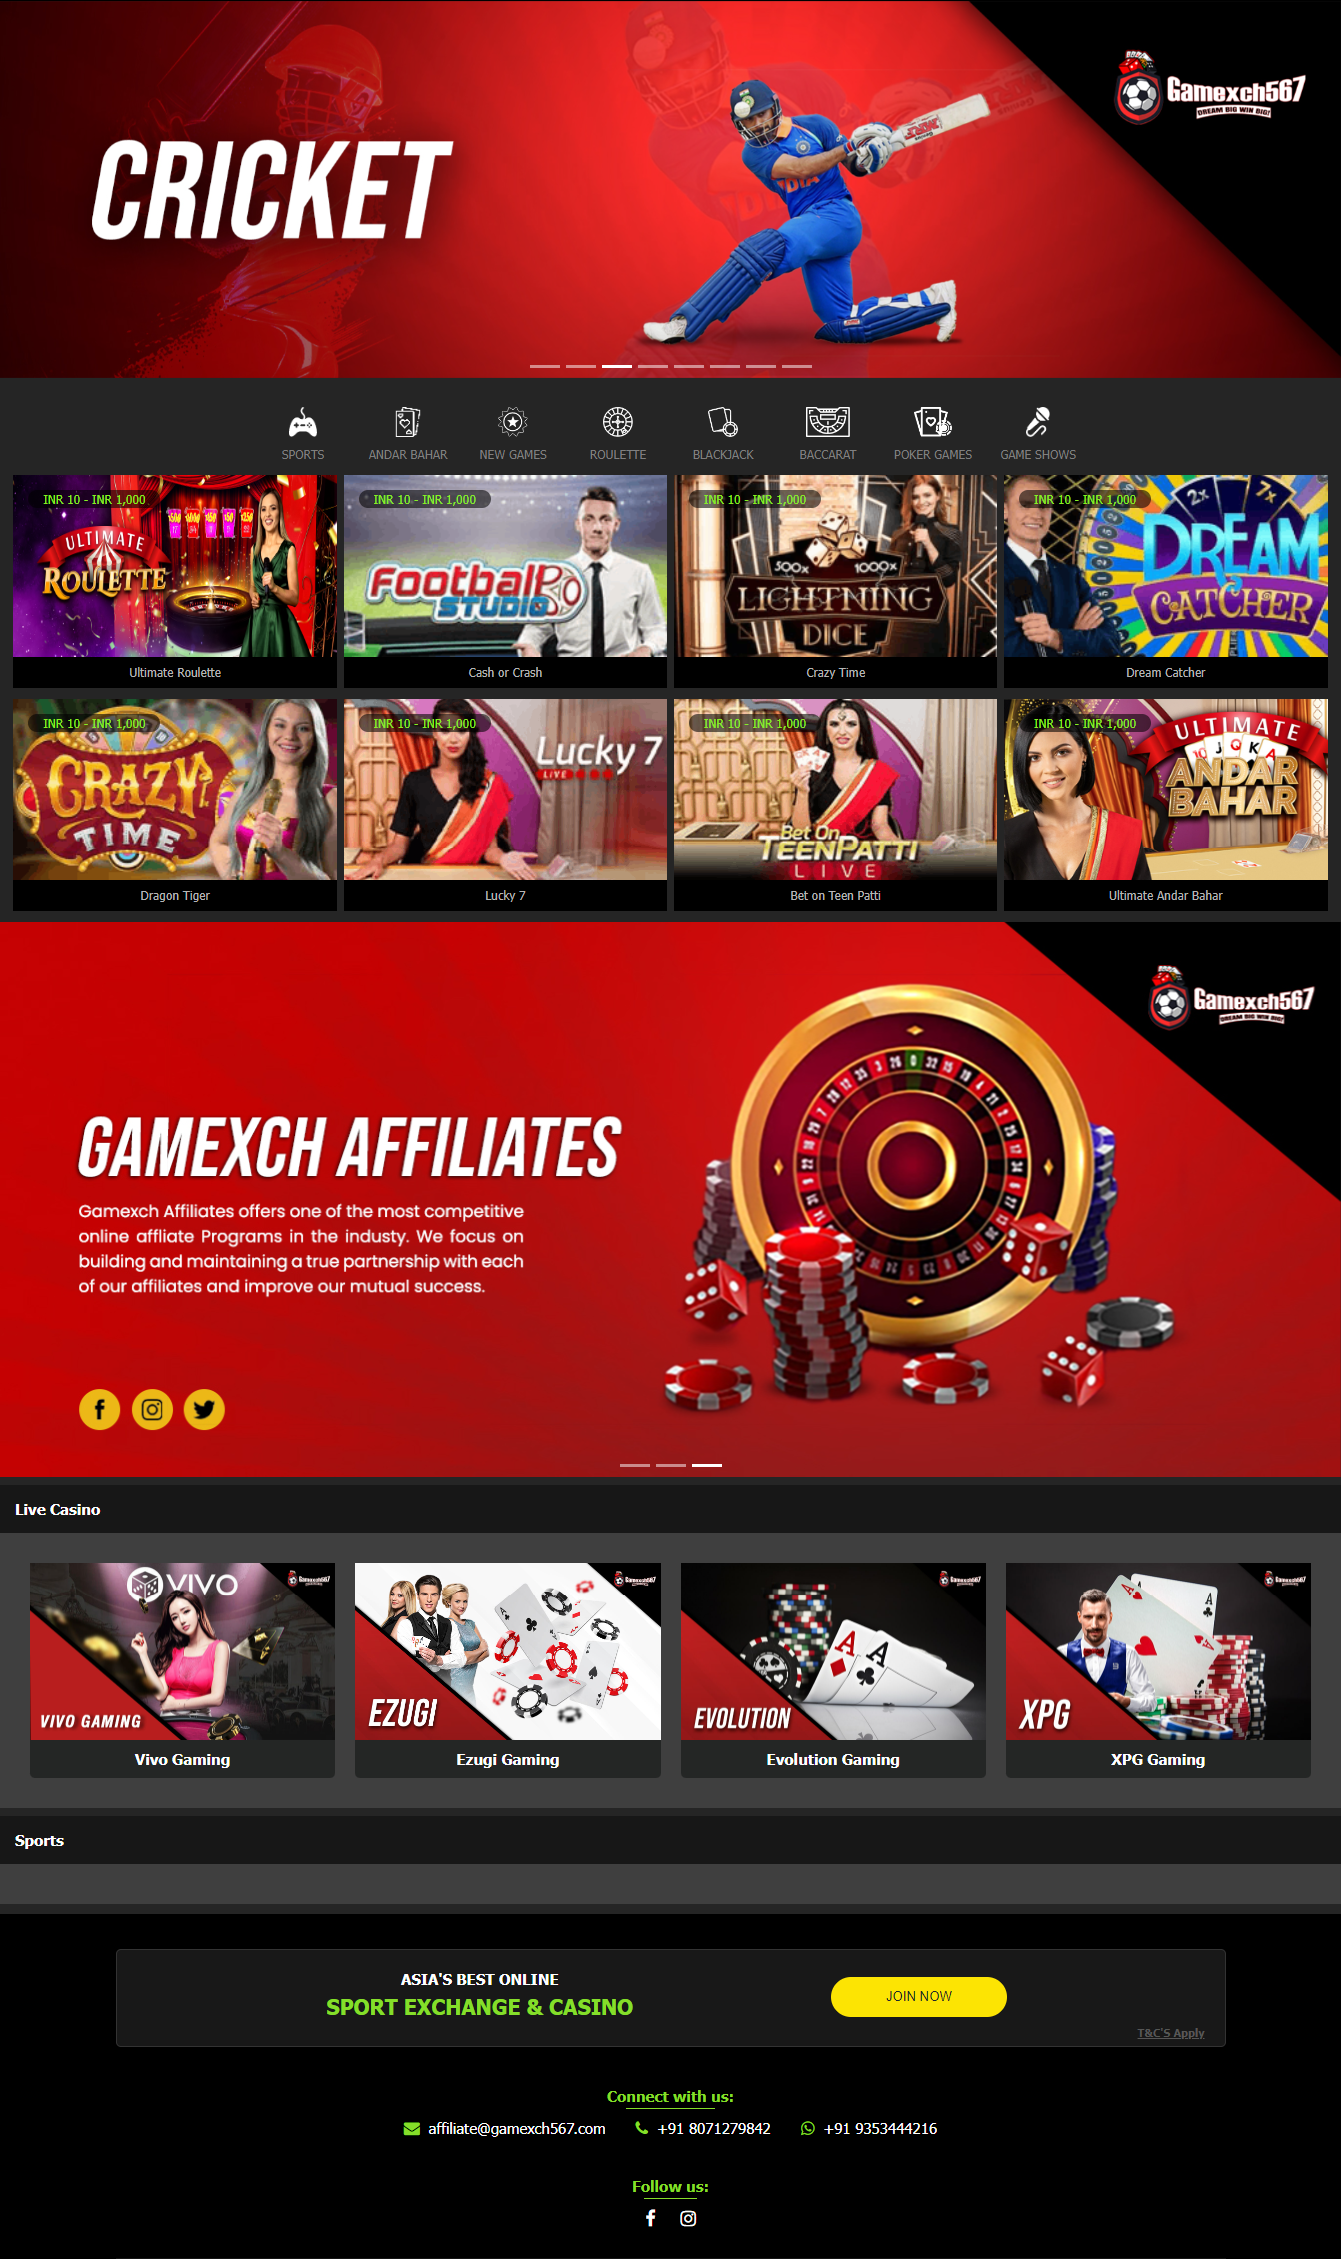 Double the Fun, Double the Rewards - Gaming Fire at Gamexch567